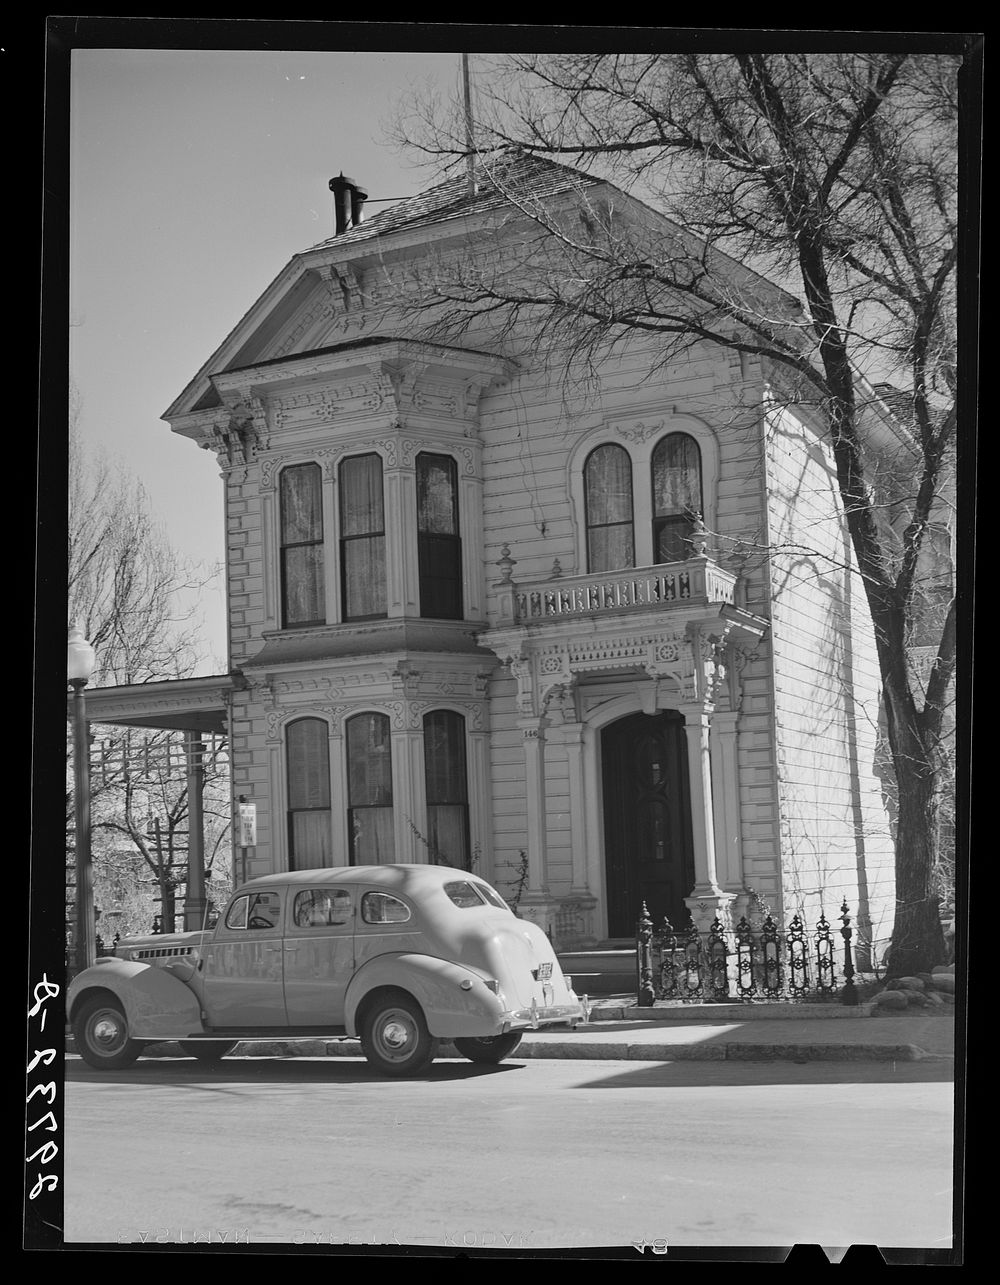 [Untitled photo, possibly related to: Architectural detail. Reno, Nevada]. Sourced from the Library of Congress.